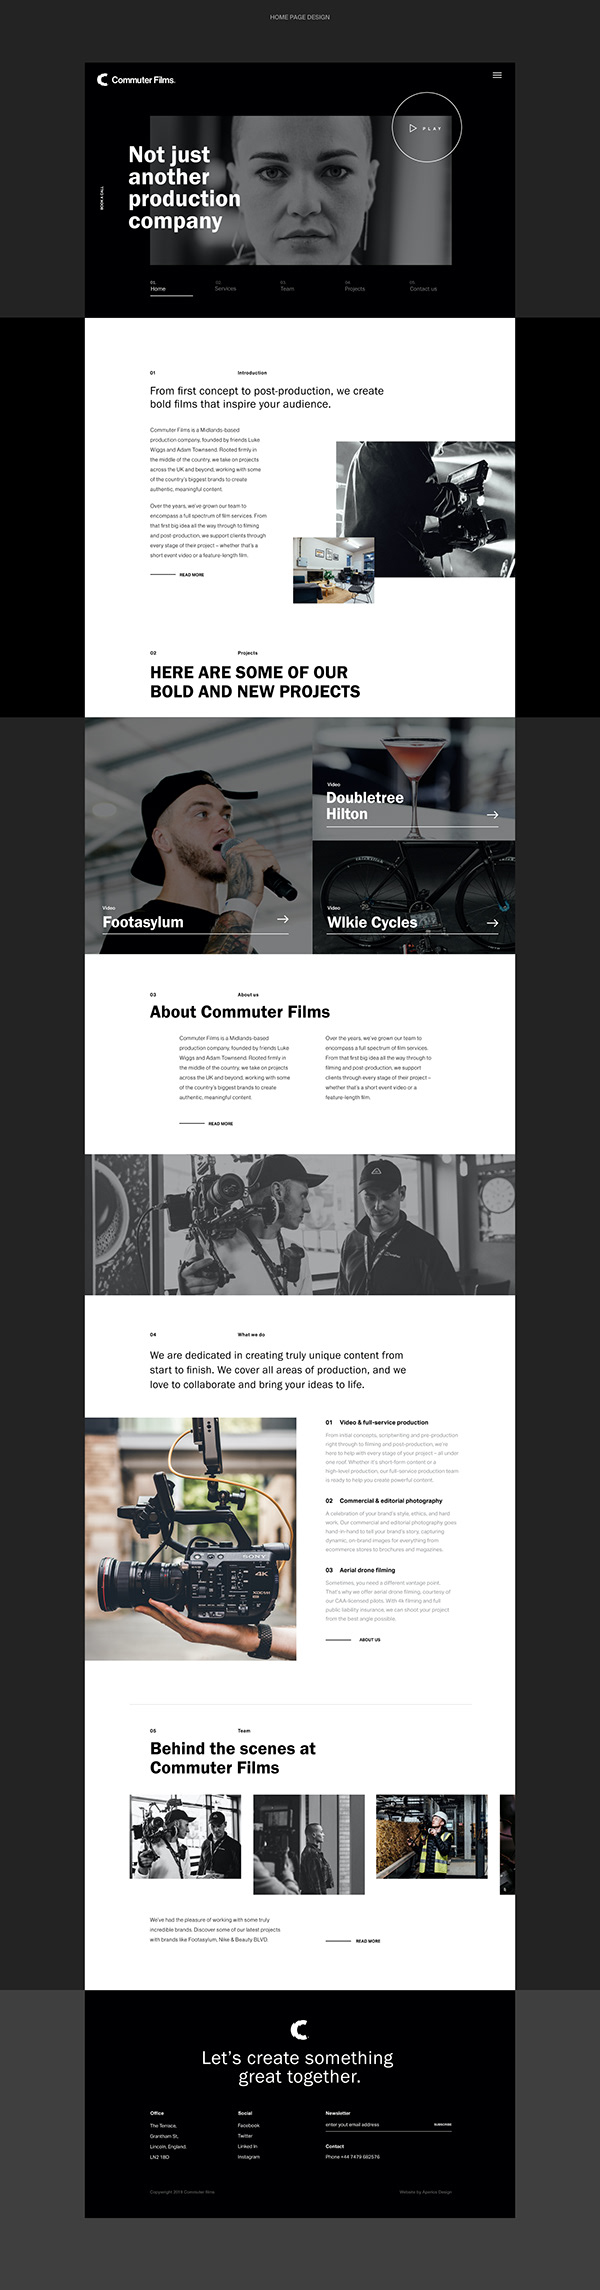 Commuter Films - Brand identity and website redesign